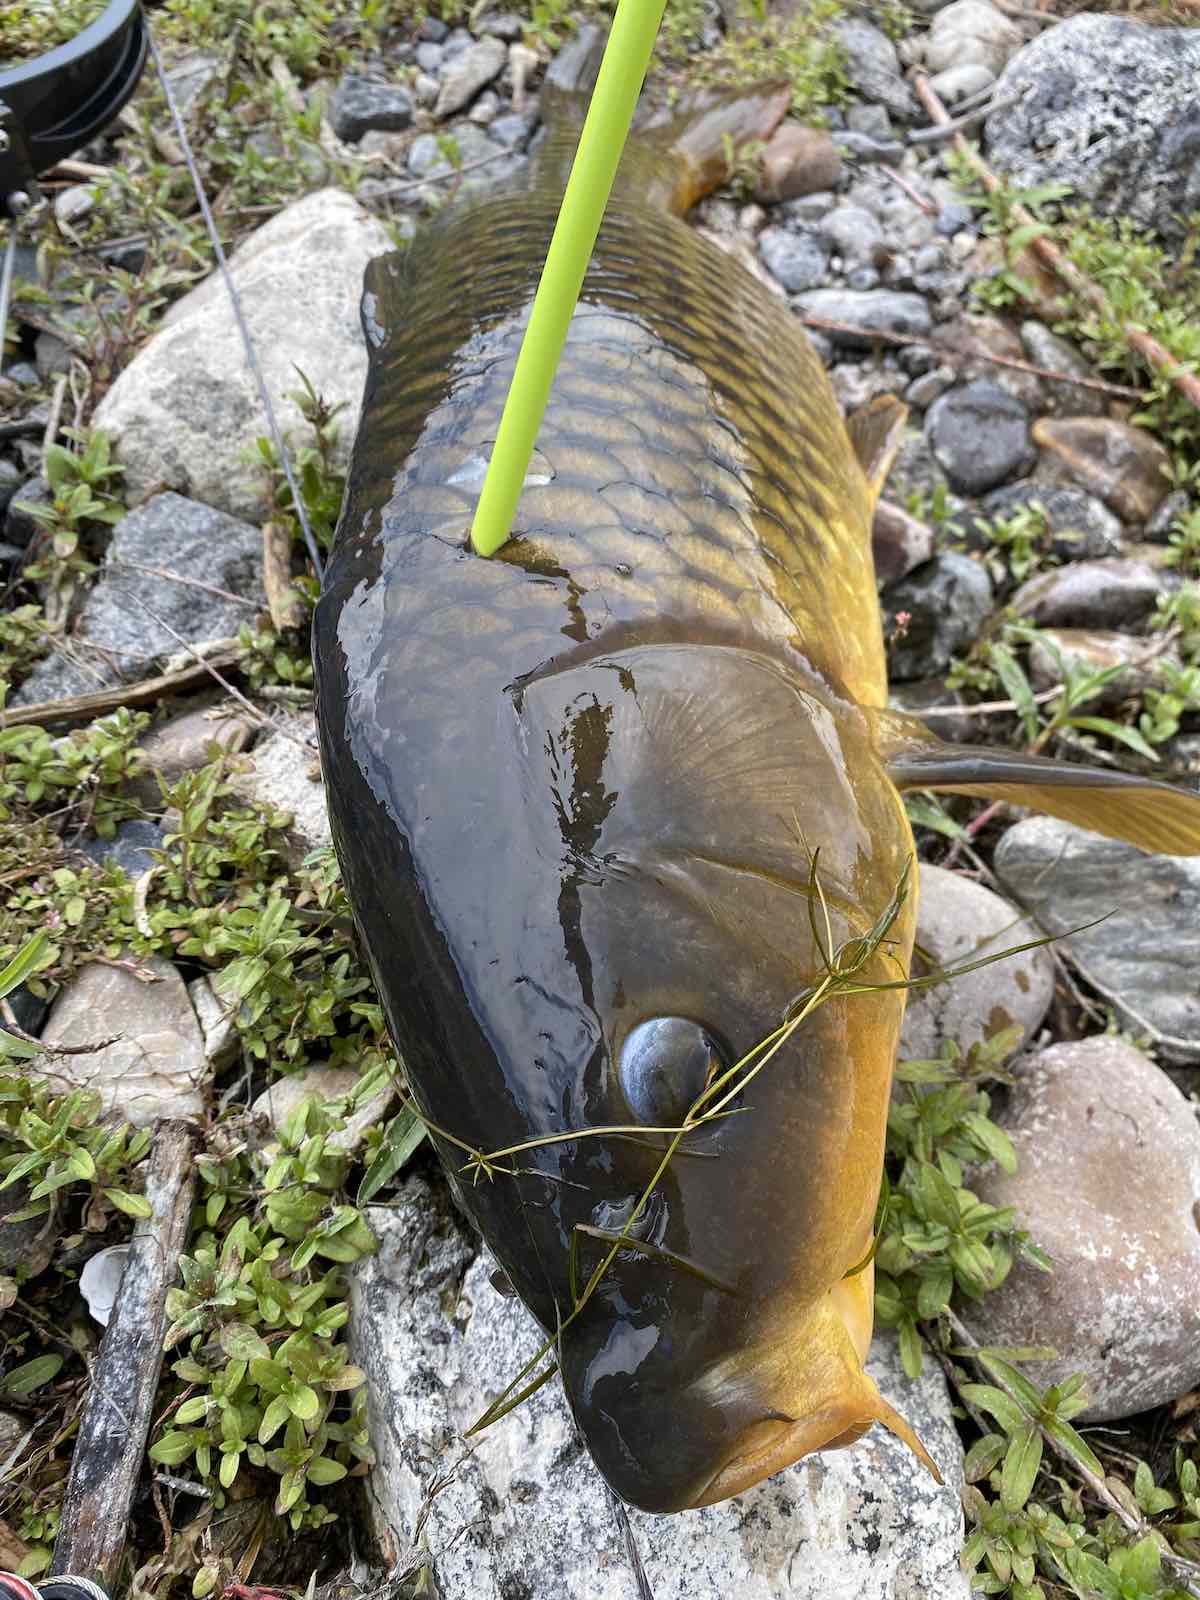 Close up of common carp with bowfishing arrow